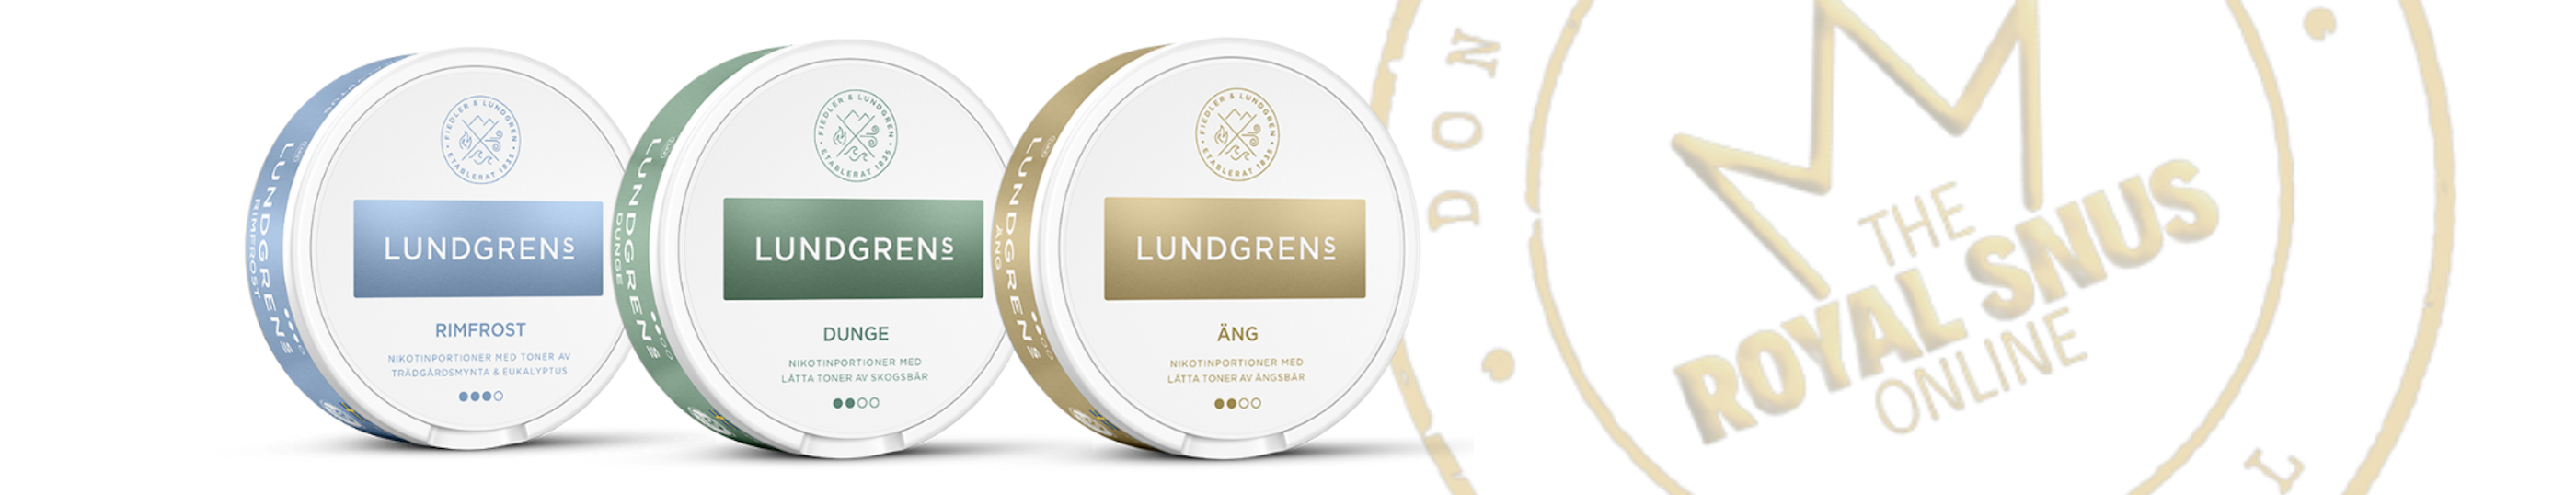 Buy Lundgrens nicotine pouches